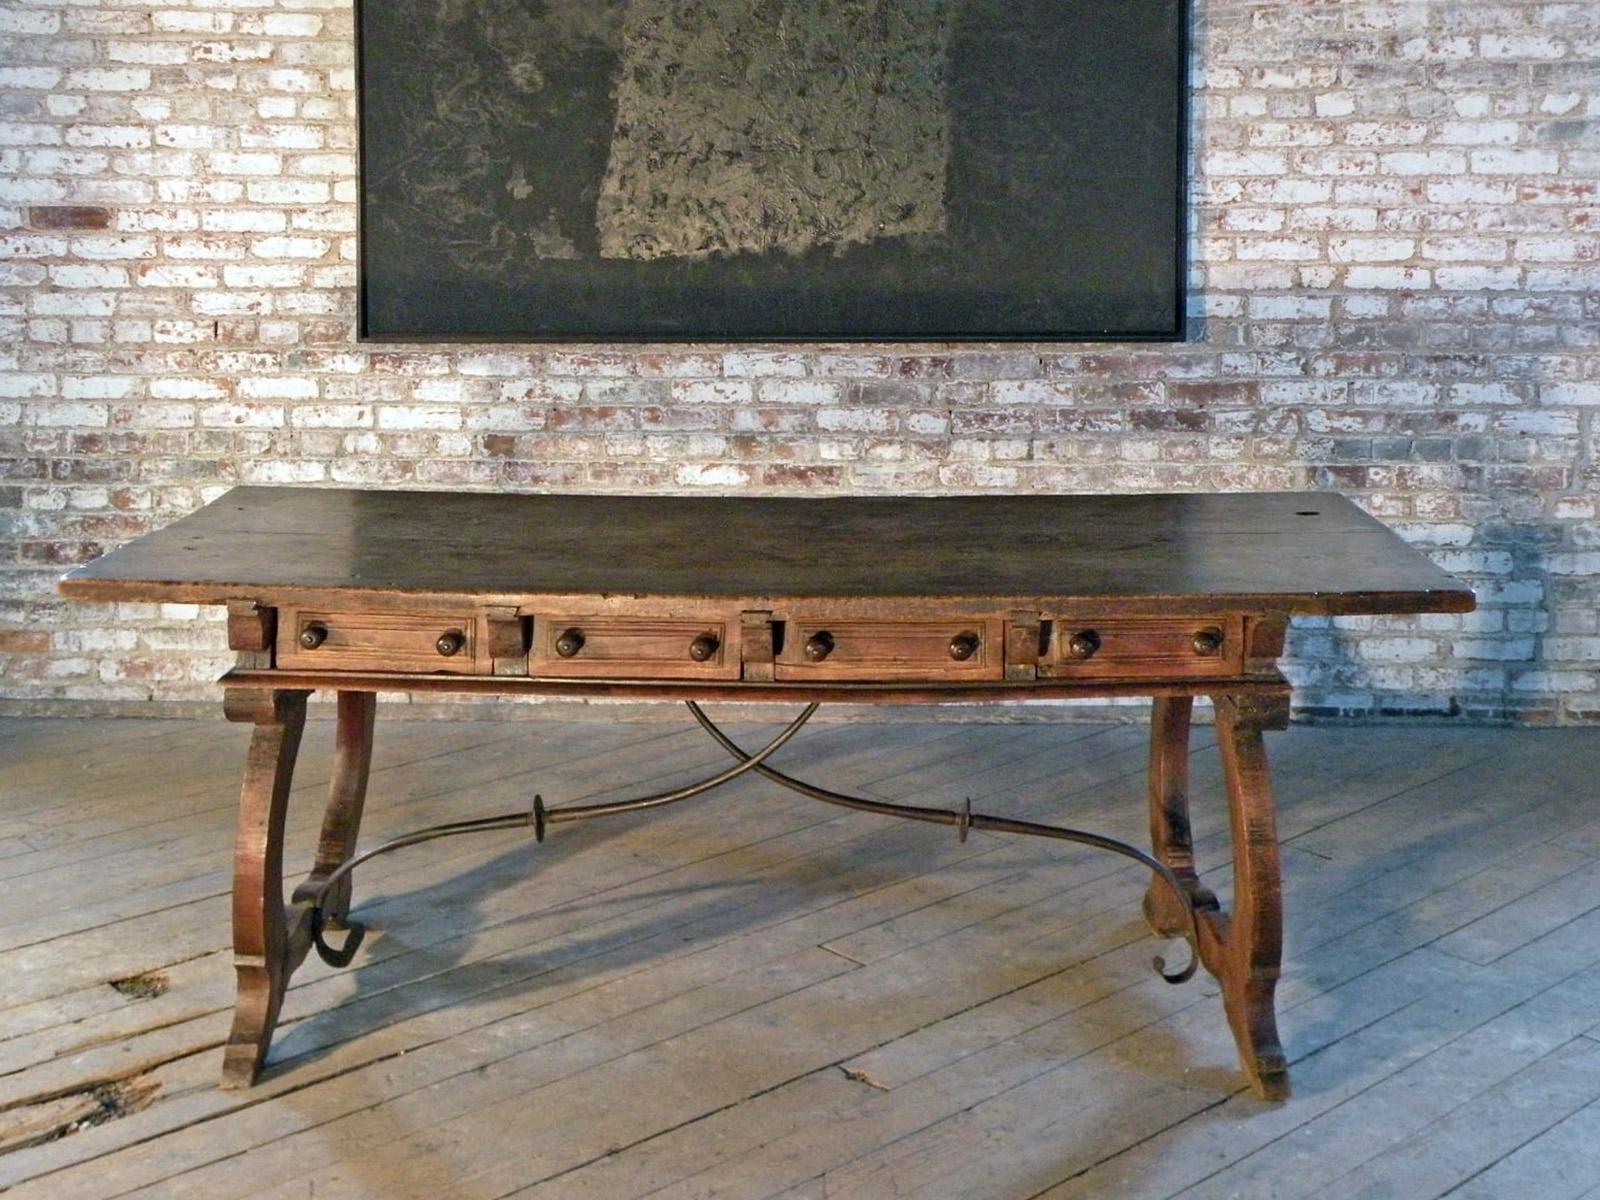 17th Century Baroque Walnut Desk / Writing or Library Table, with a thick walnut one-plank top above a frieze containing four drawers with molded, paneled fronts and wooden pulls supported by very unique, beautifully shaped lyra-form legs, connected